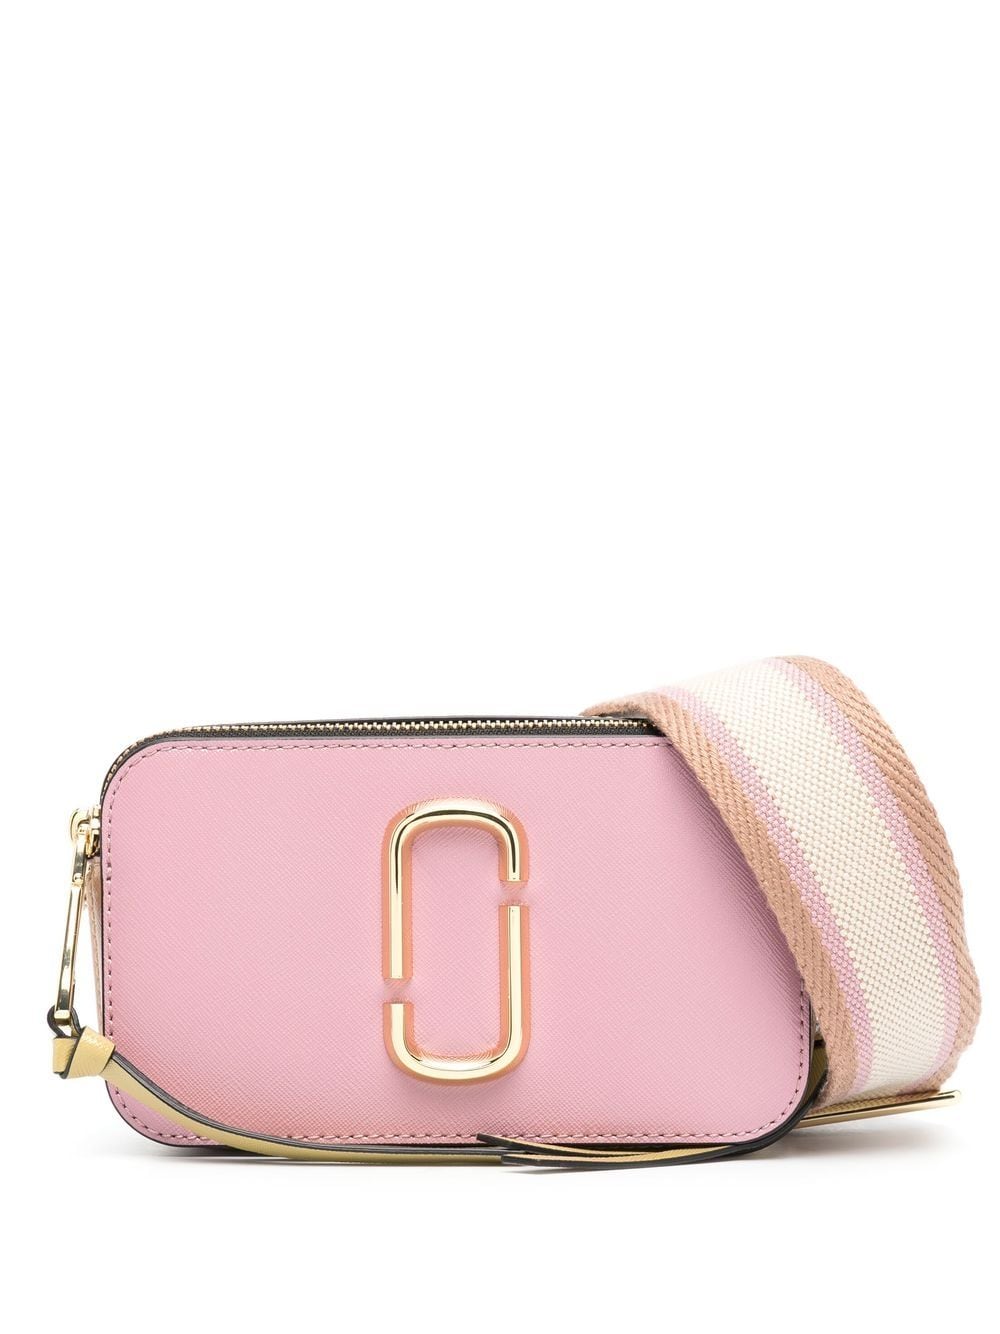 Marc Jacobs Snapshot Camera Bag - hot pink, Luxury, Bags & Wallets